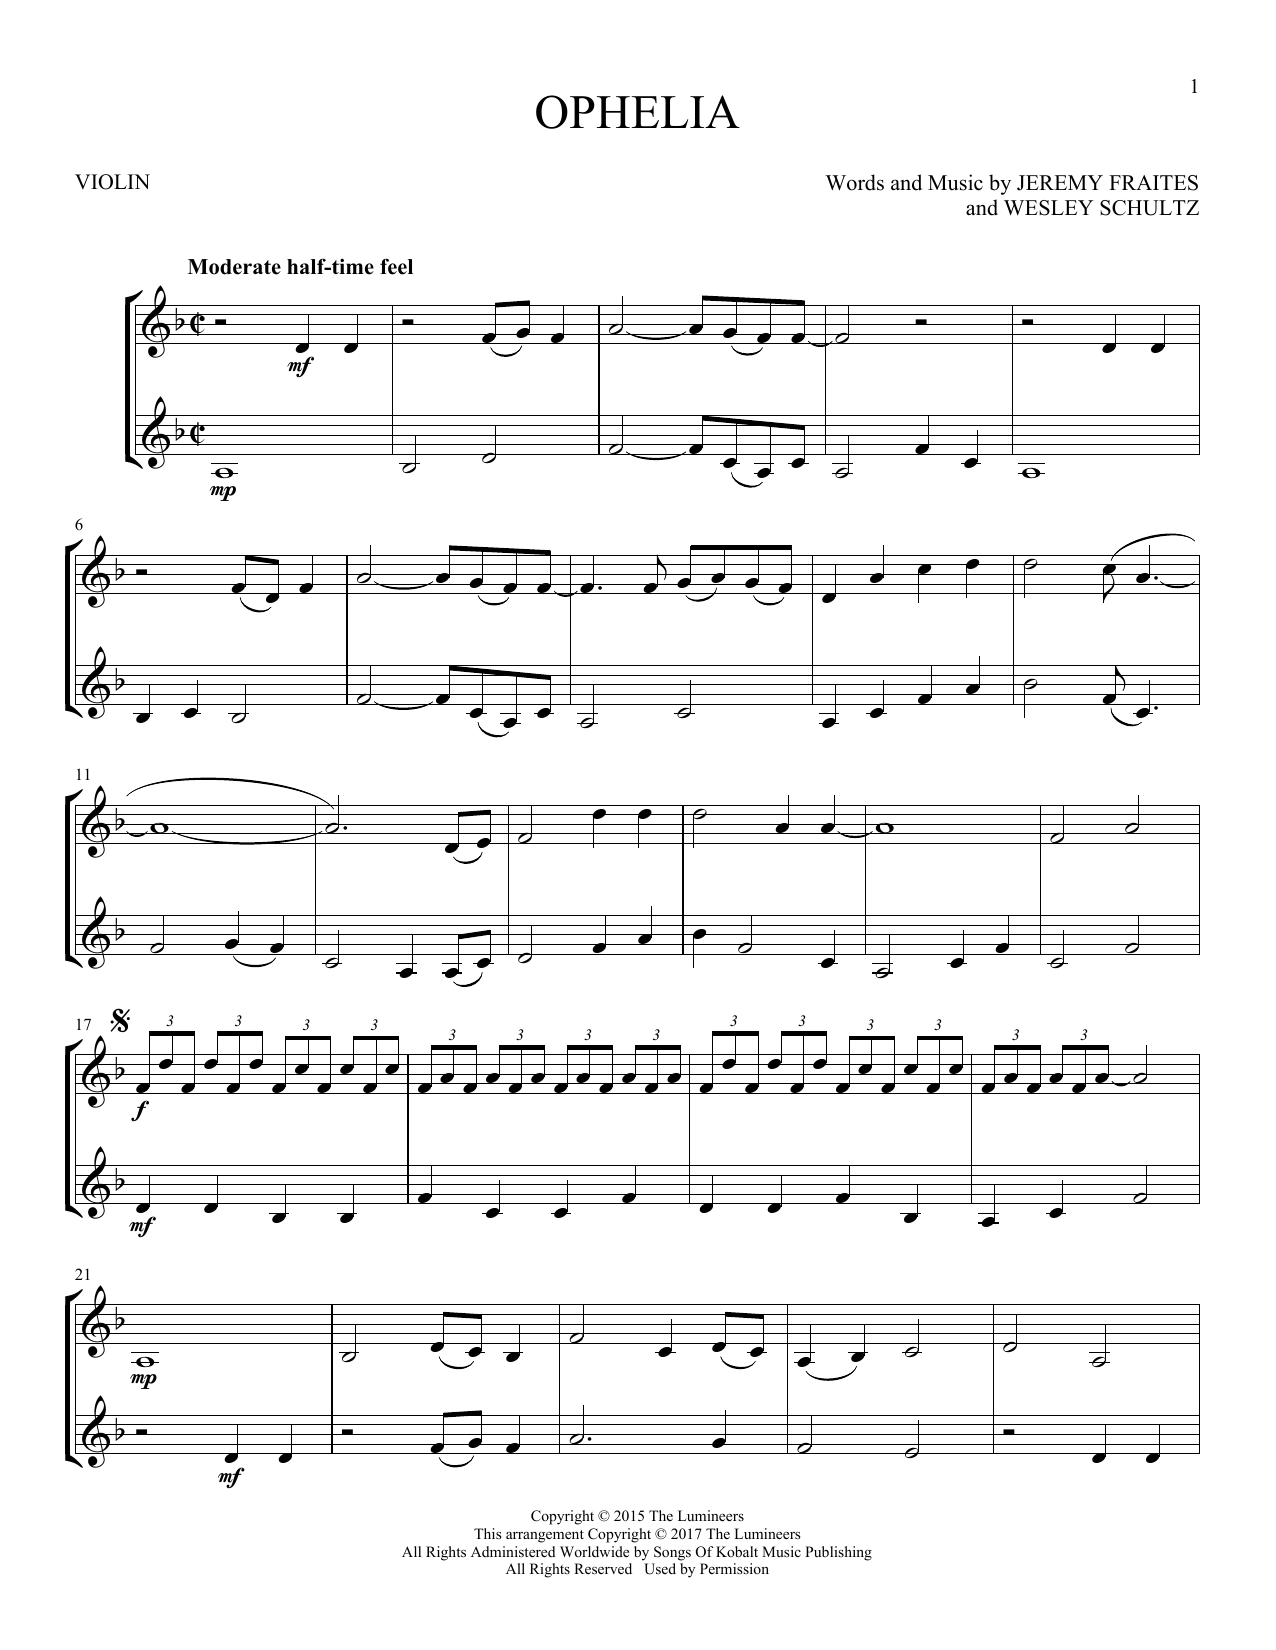 The Lumineers "Ophelia" Sheet Music Notes | Download Printable PDF